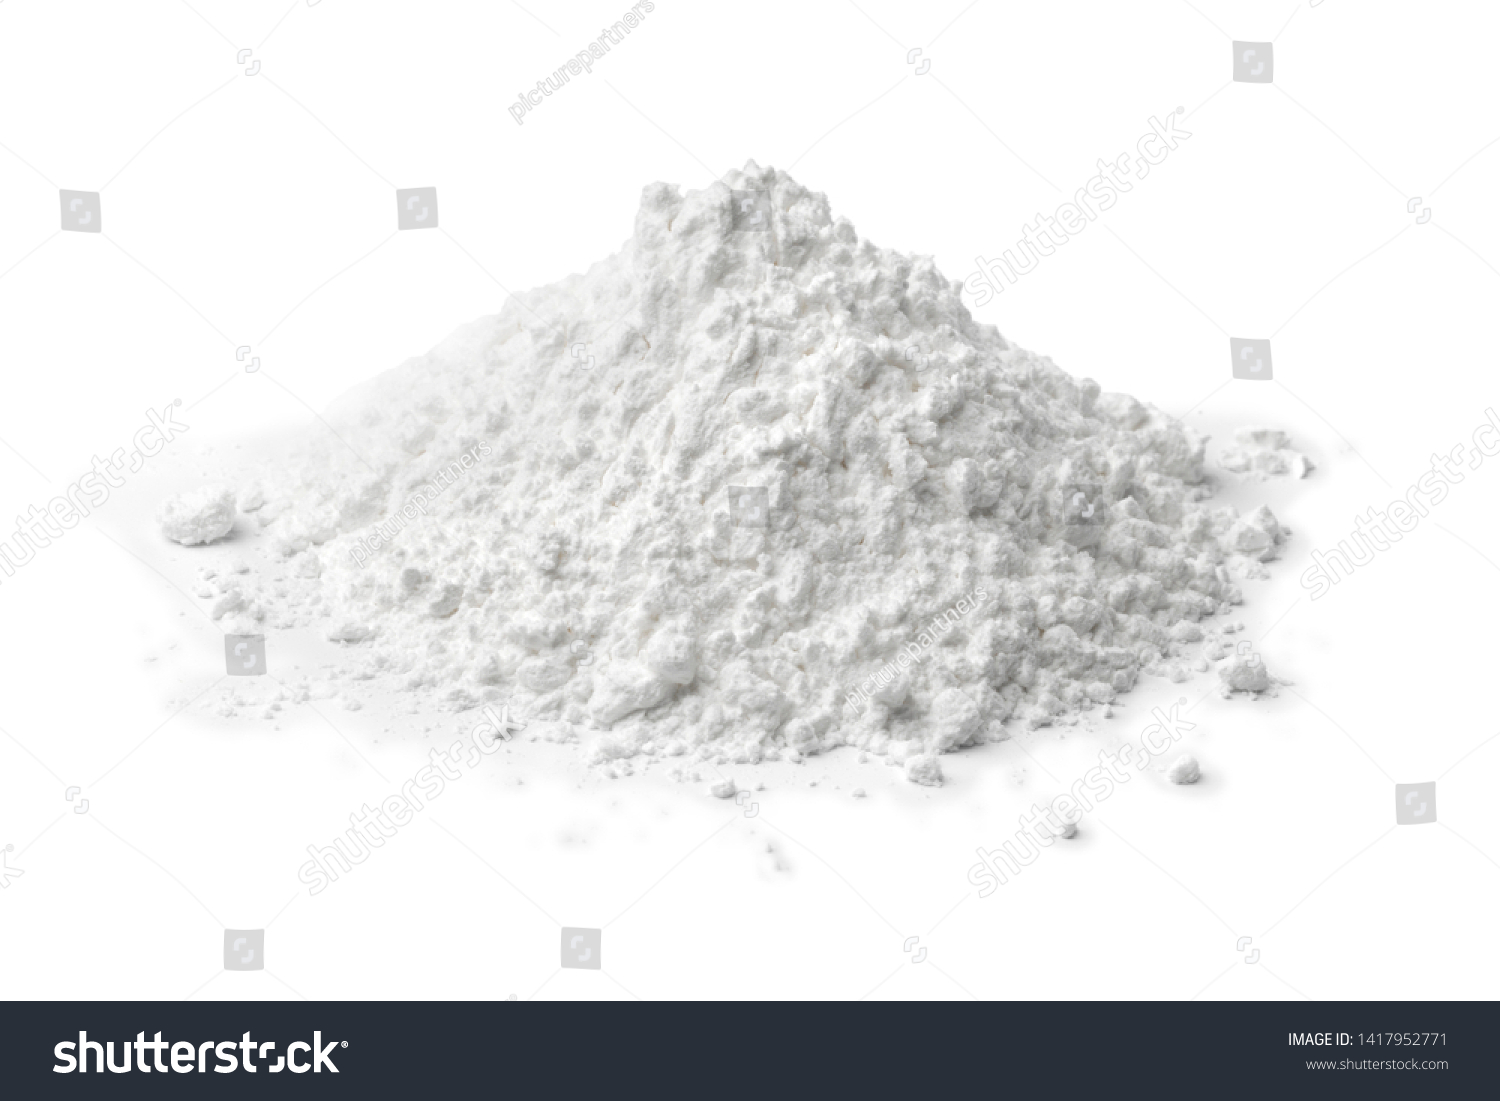 Heap of white corn starch isolated on white background #1417952771